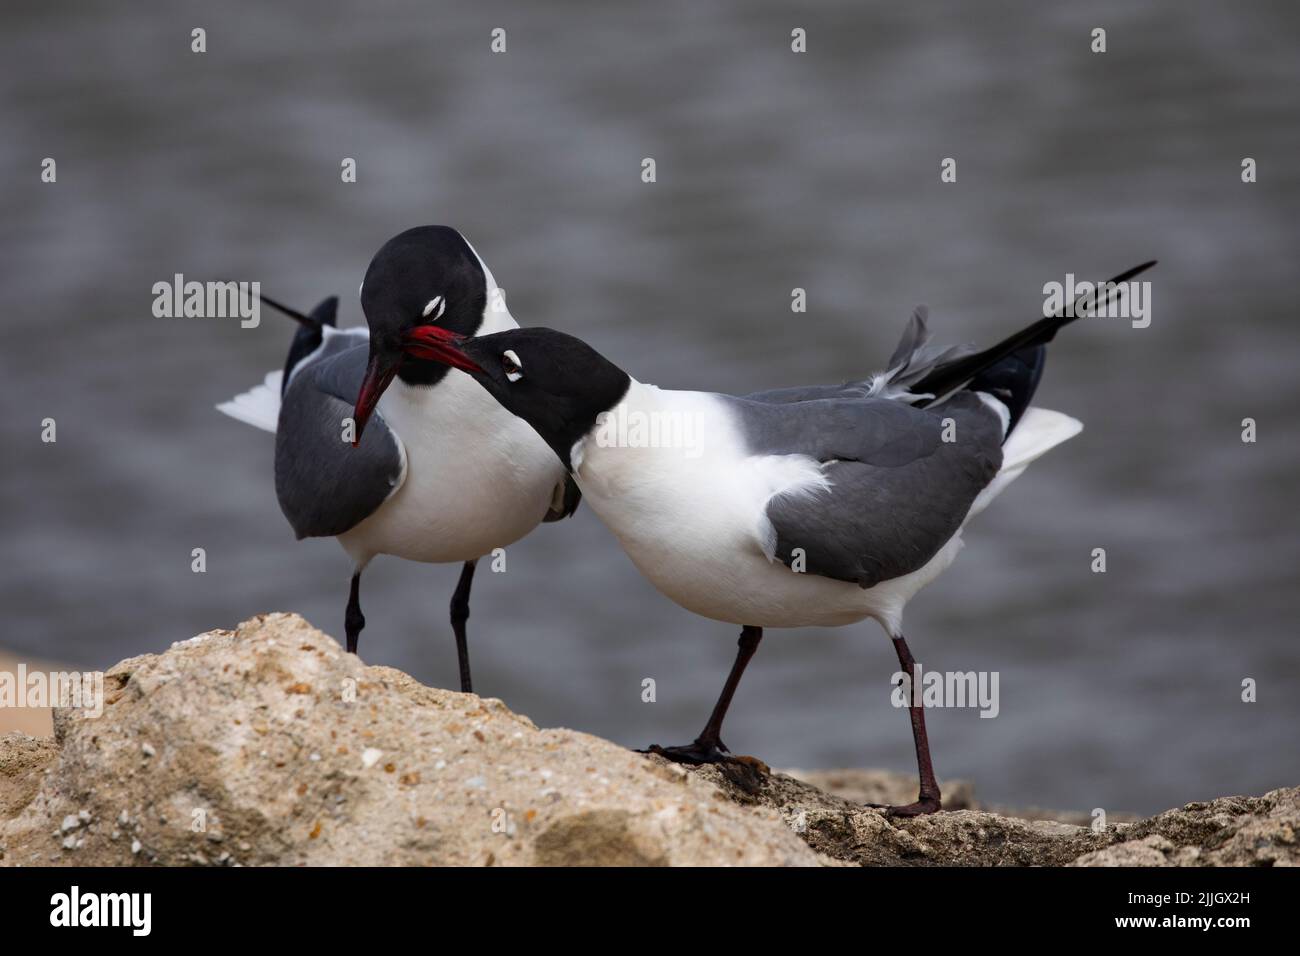 Affectionate kisses given by courting Laughing Gulls at Mobile bay in Alabama, United States Stock Photo